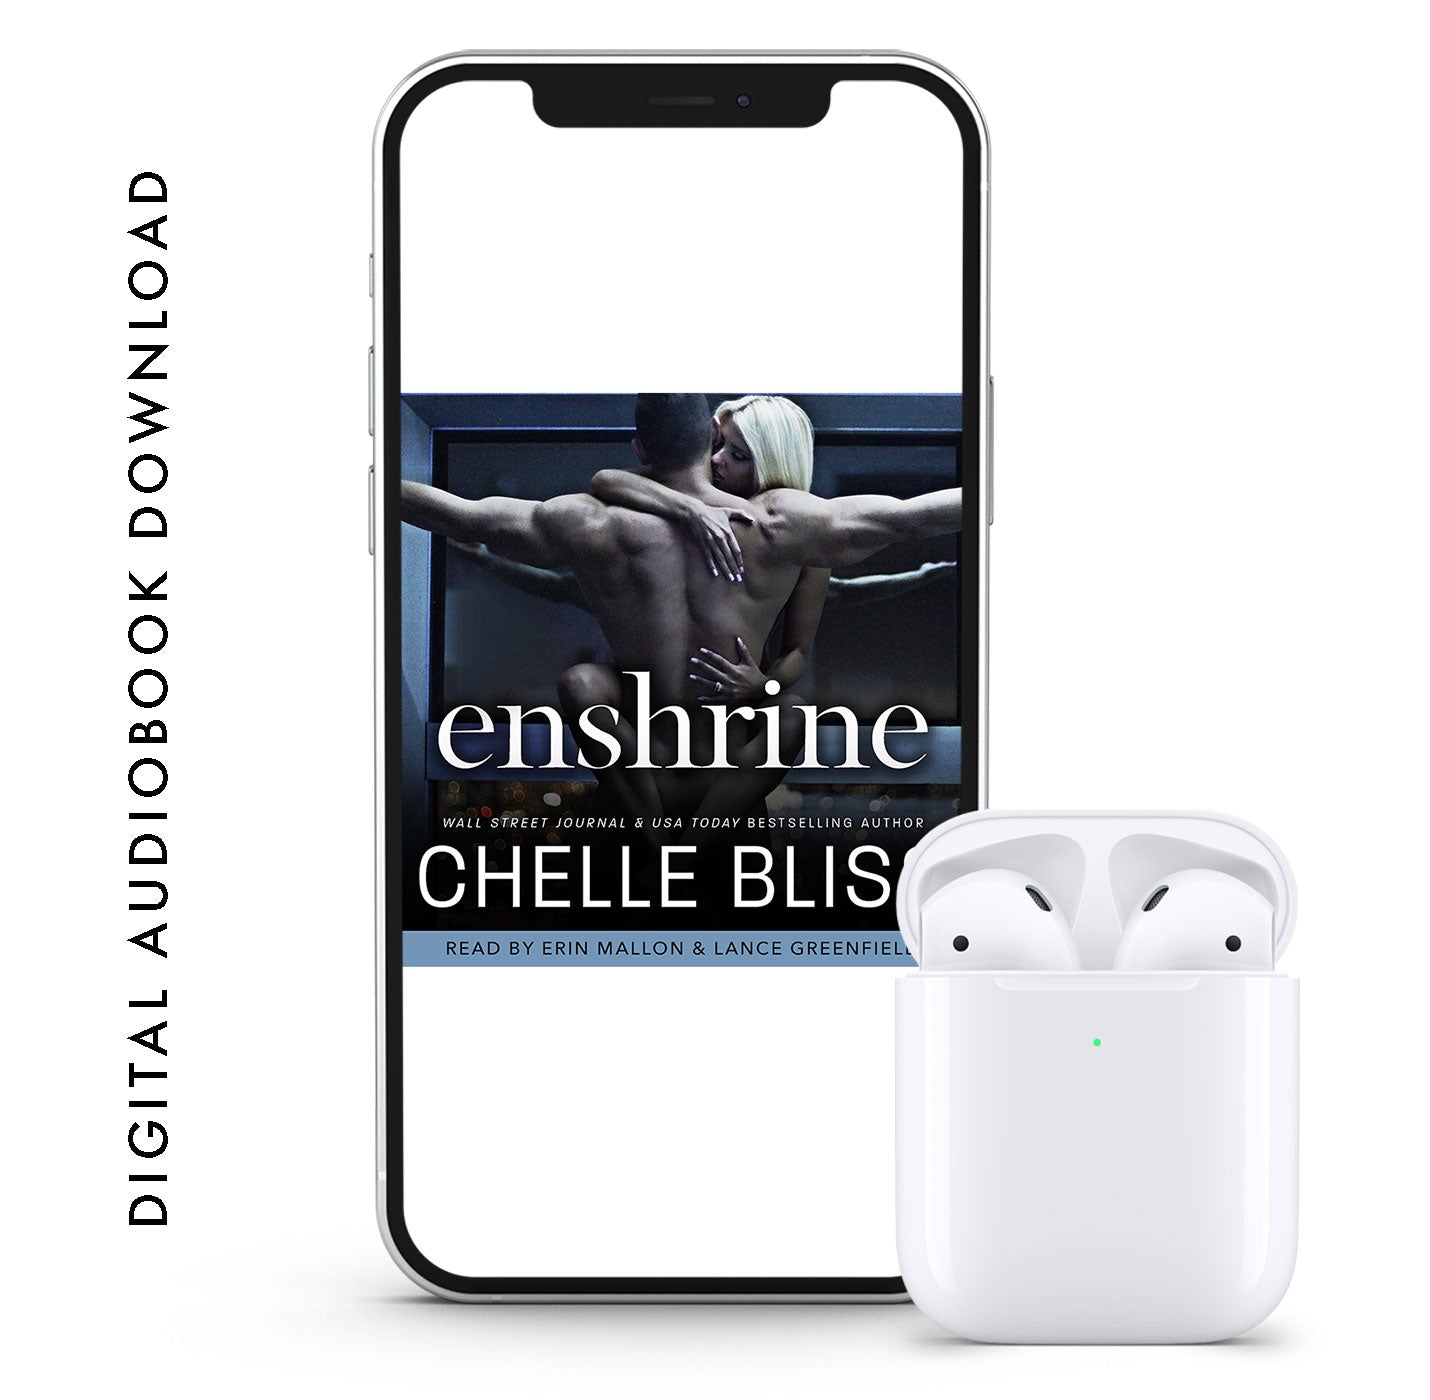 enshrince audiobook by chelle bliss man and woman embracing 